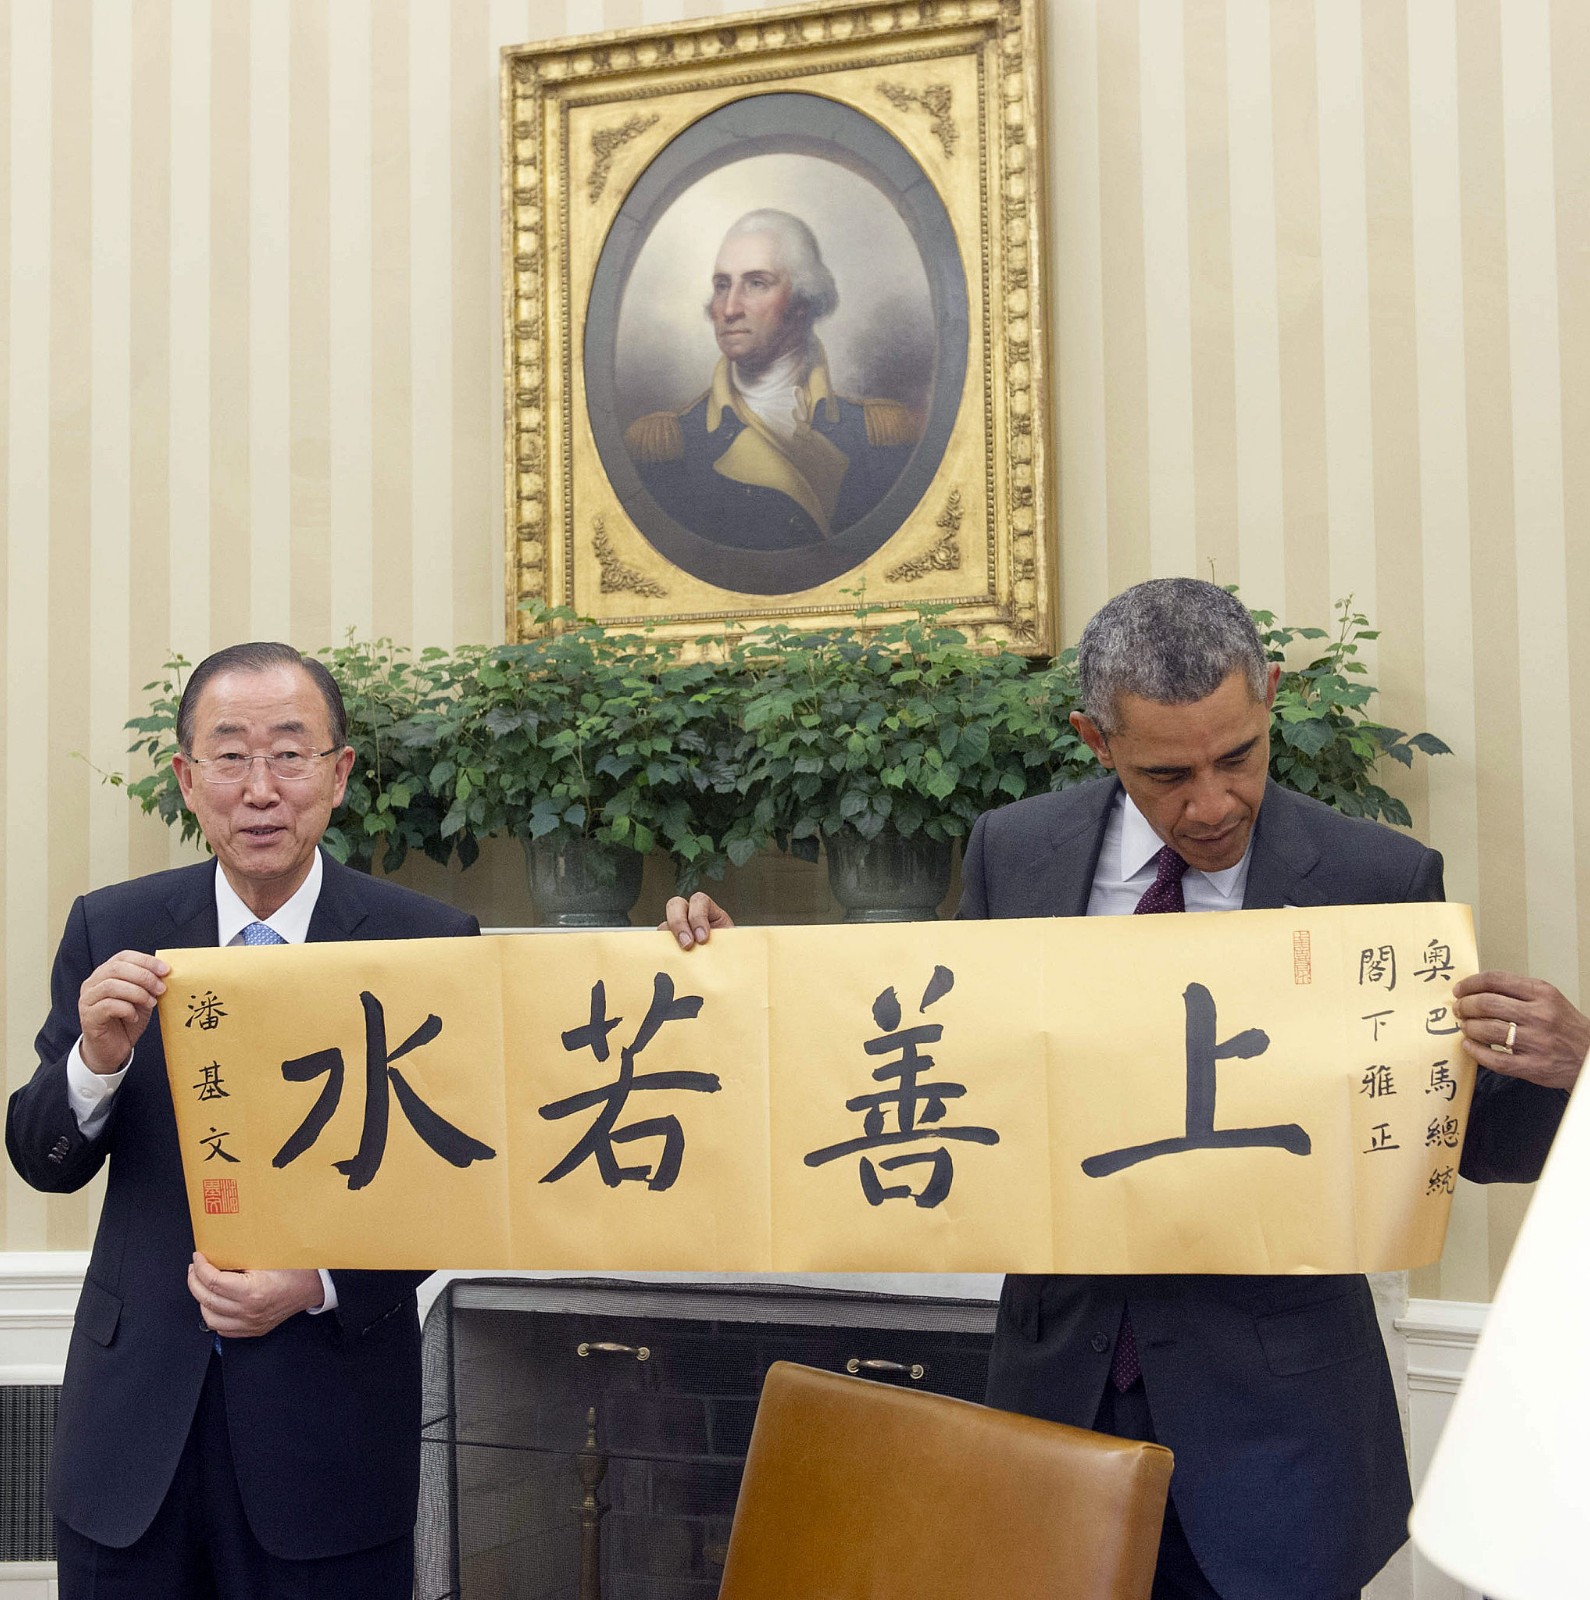 Ban Ki-moon, the former secretary-general of the UN, visited President Obama during his tenure and presented him with a piece of calligraphy as a birthday present. The calligraphy displayed the Chinese proverb 